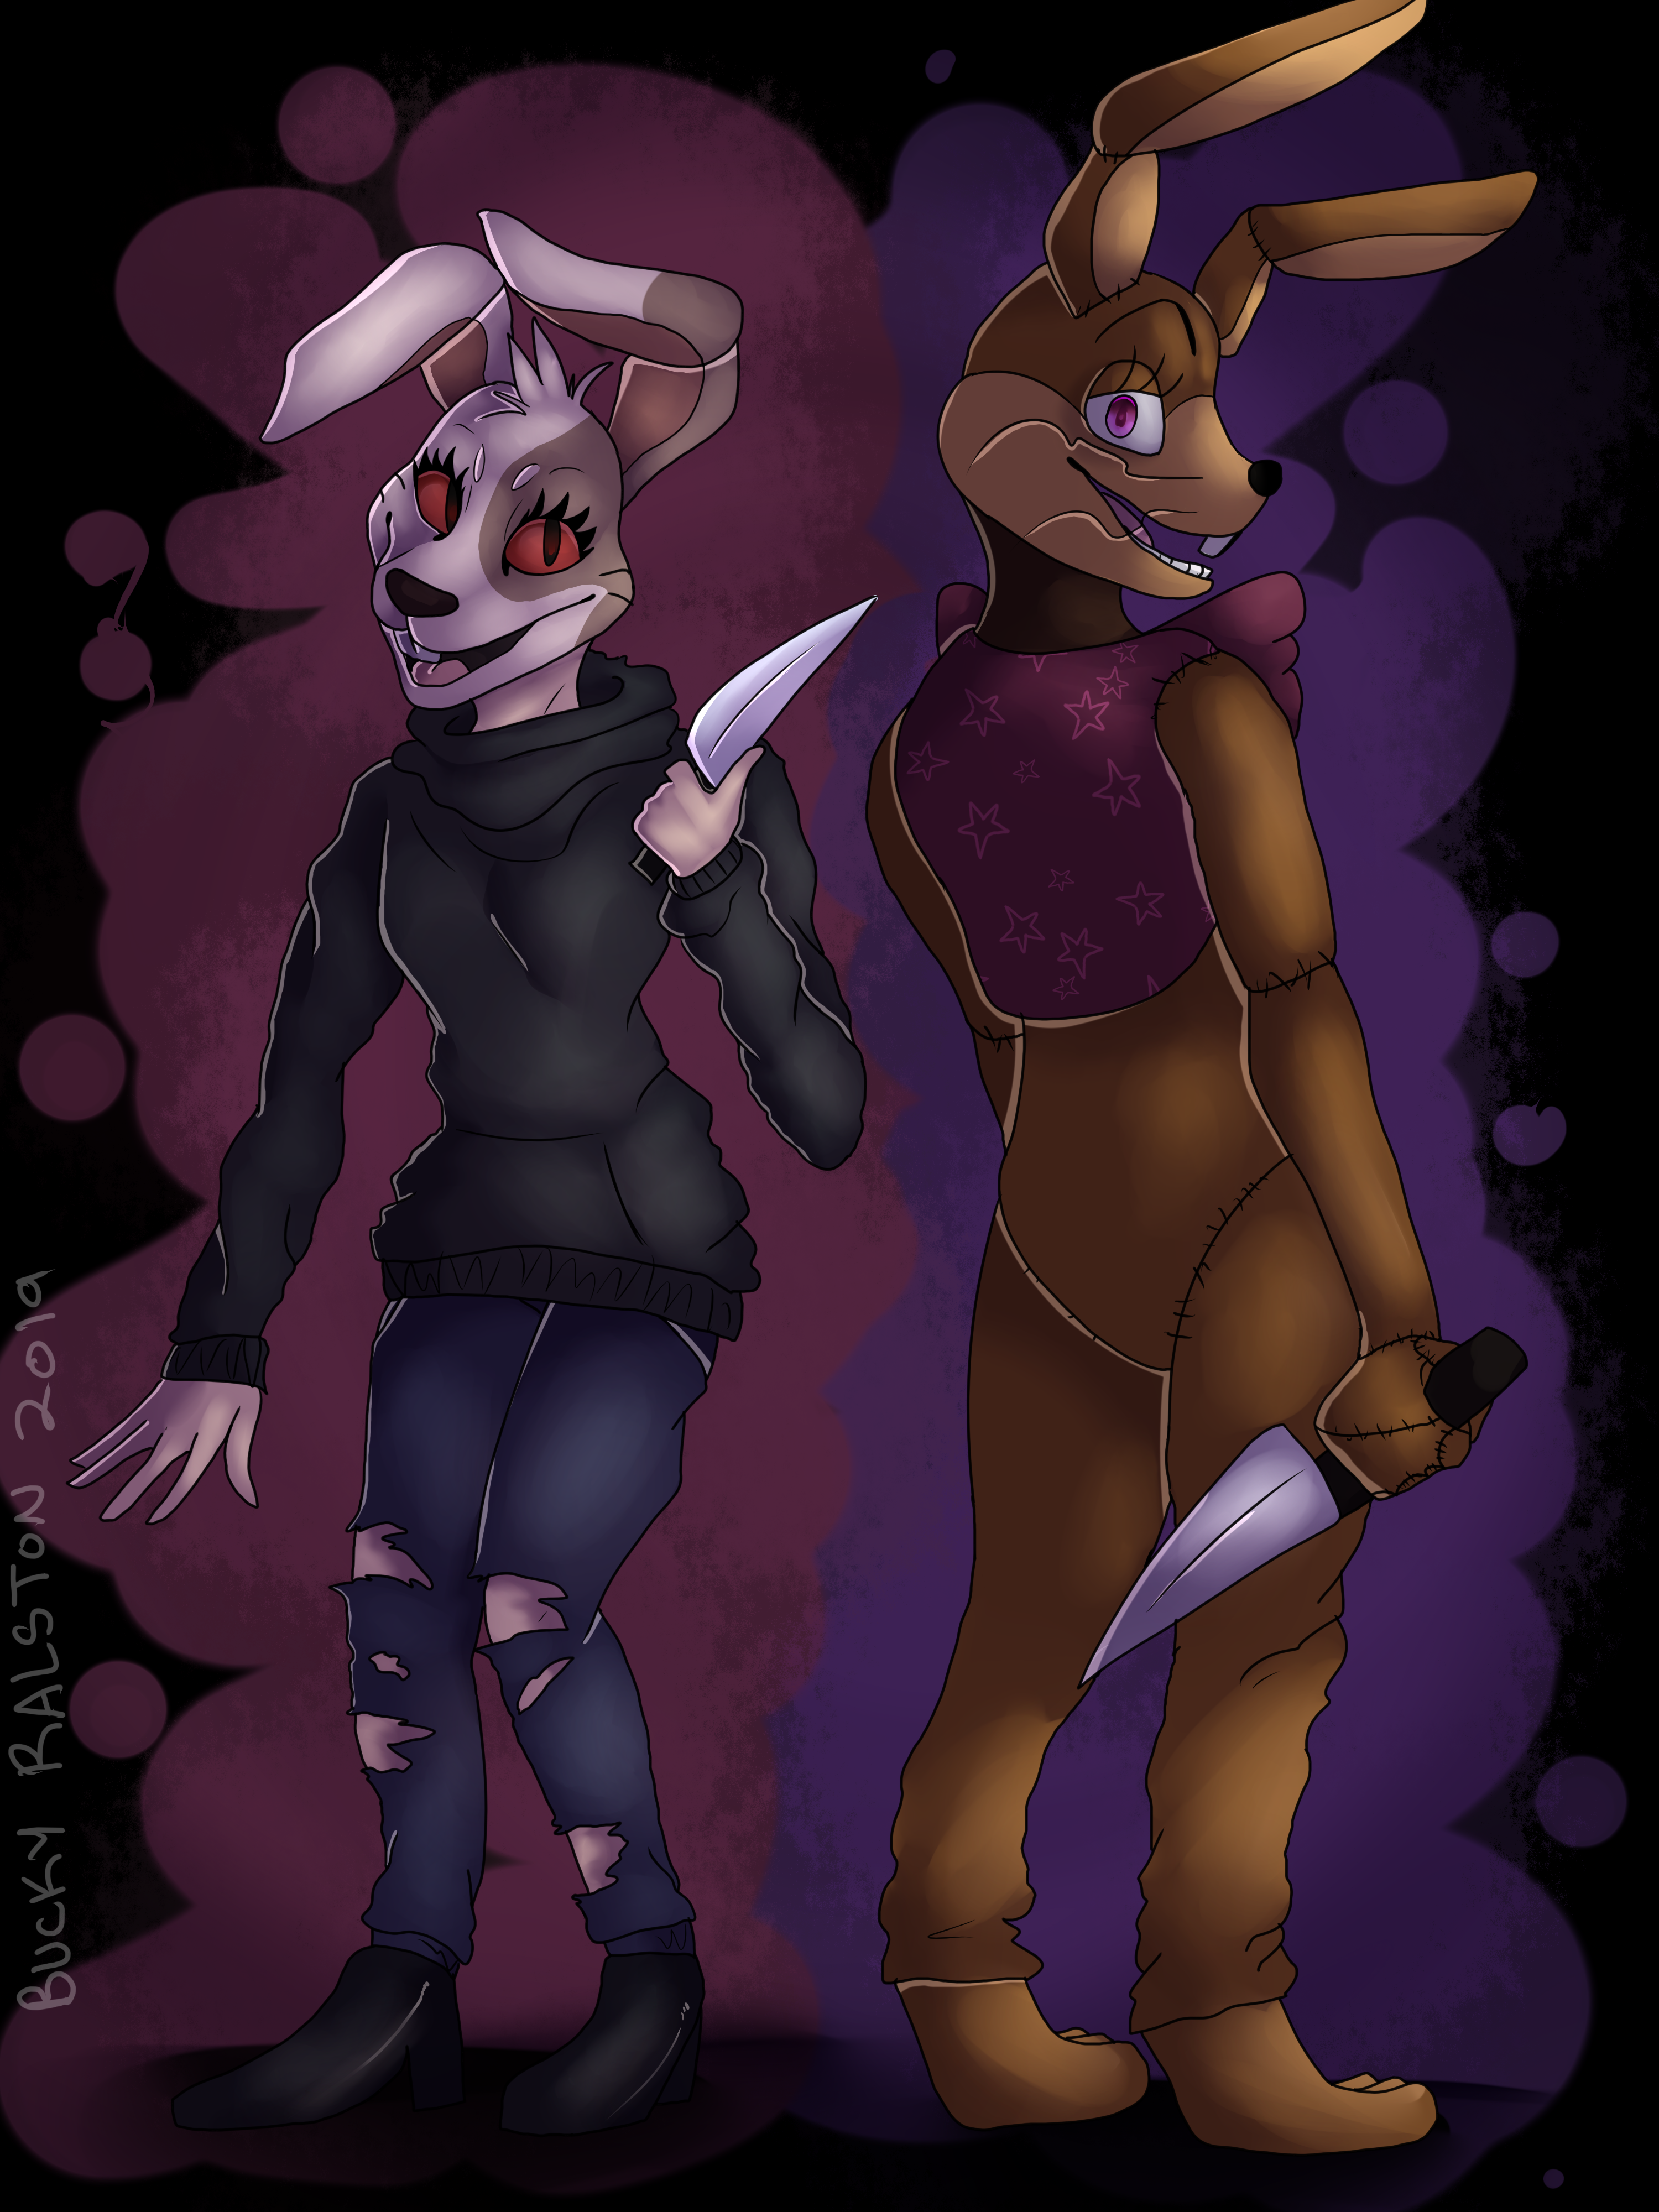 Glitchtrap and Vanny (art by me, please do not use without permission)